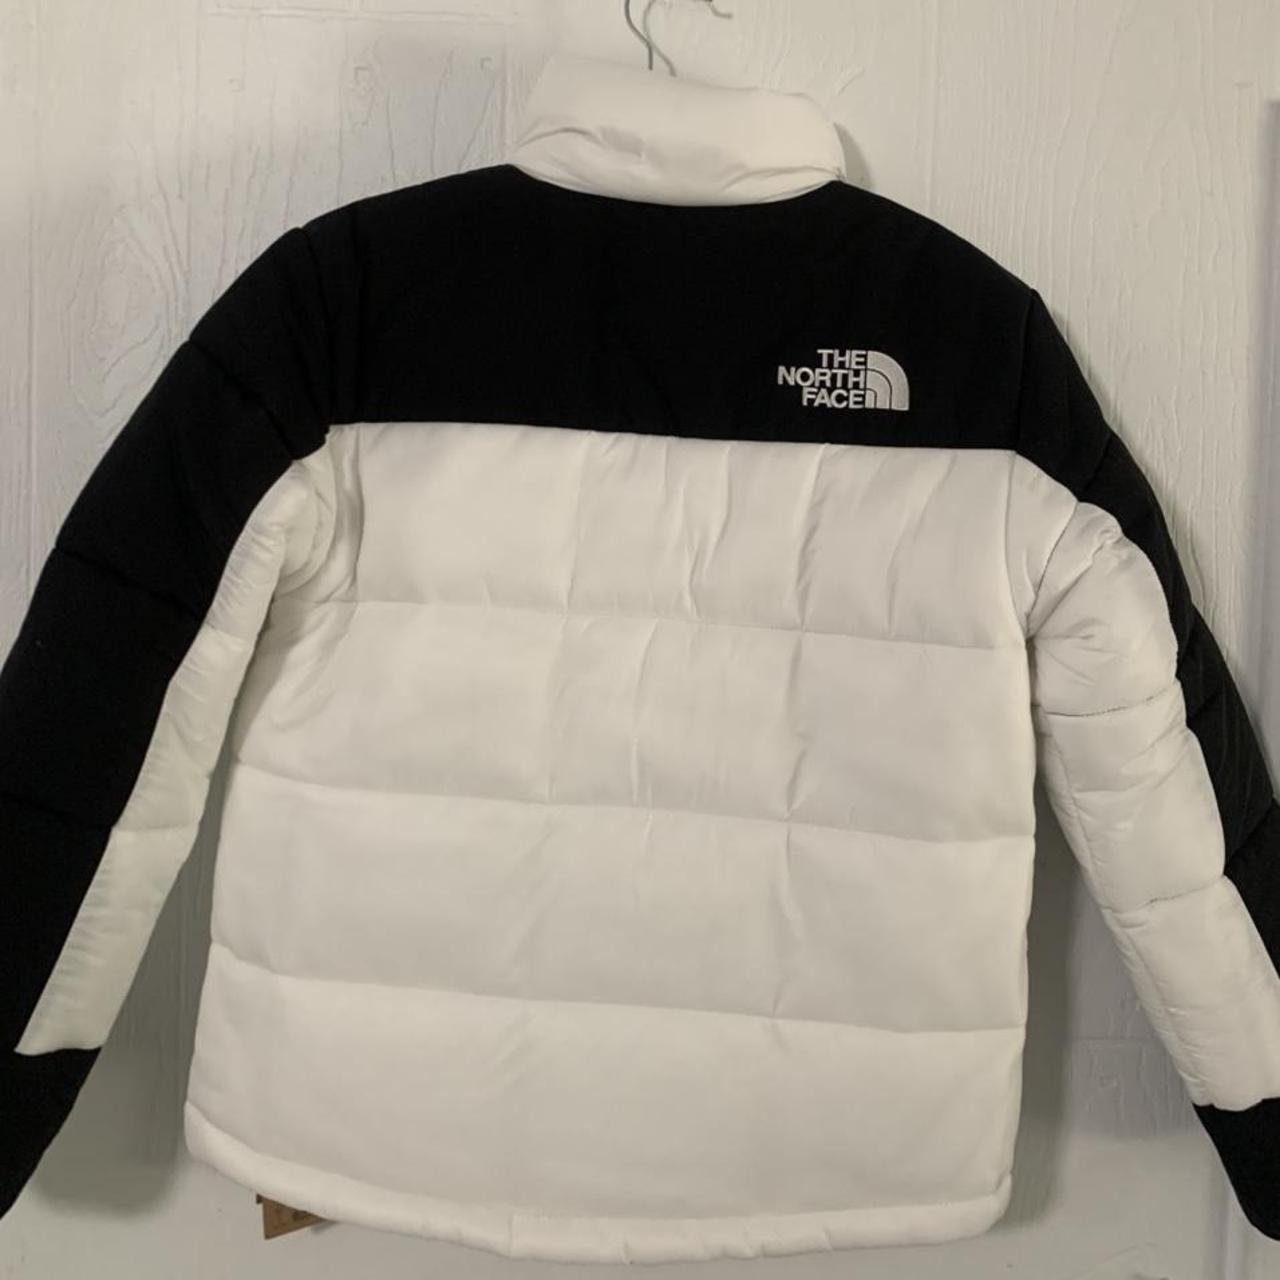 The north face puffer jacket, brand new never worn. - Depop